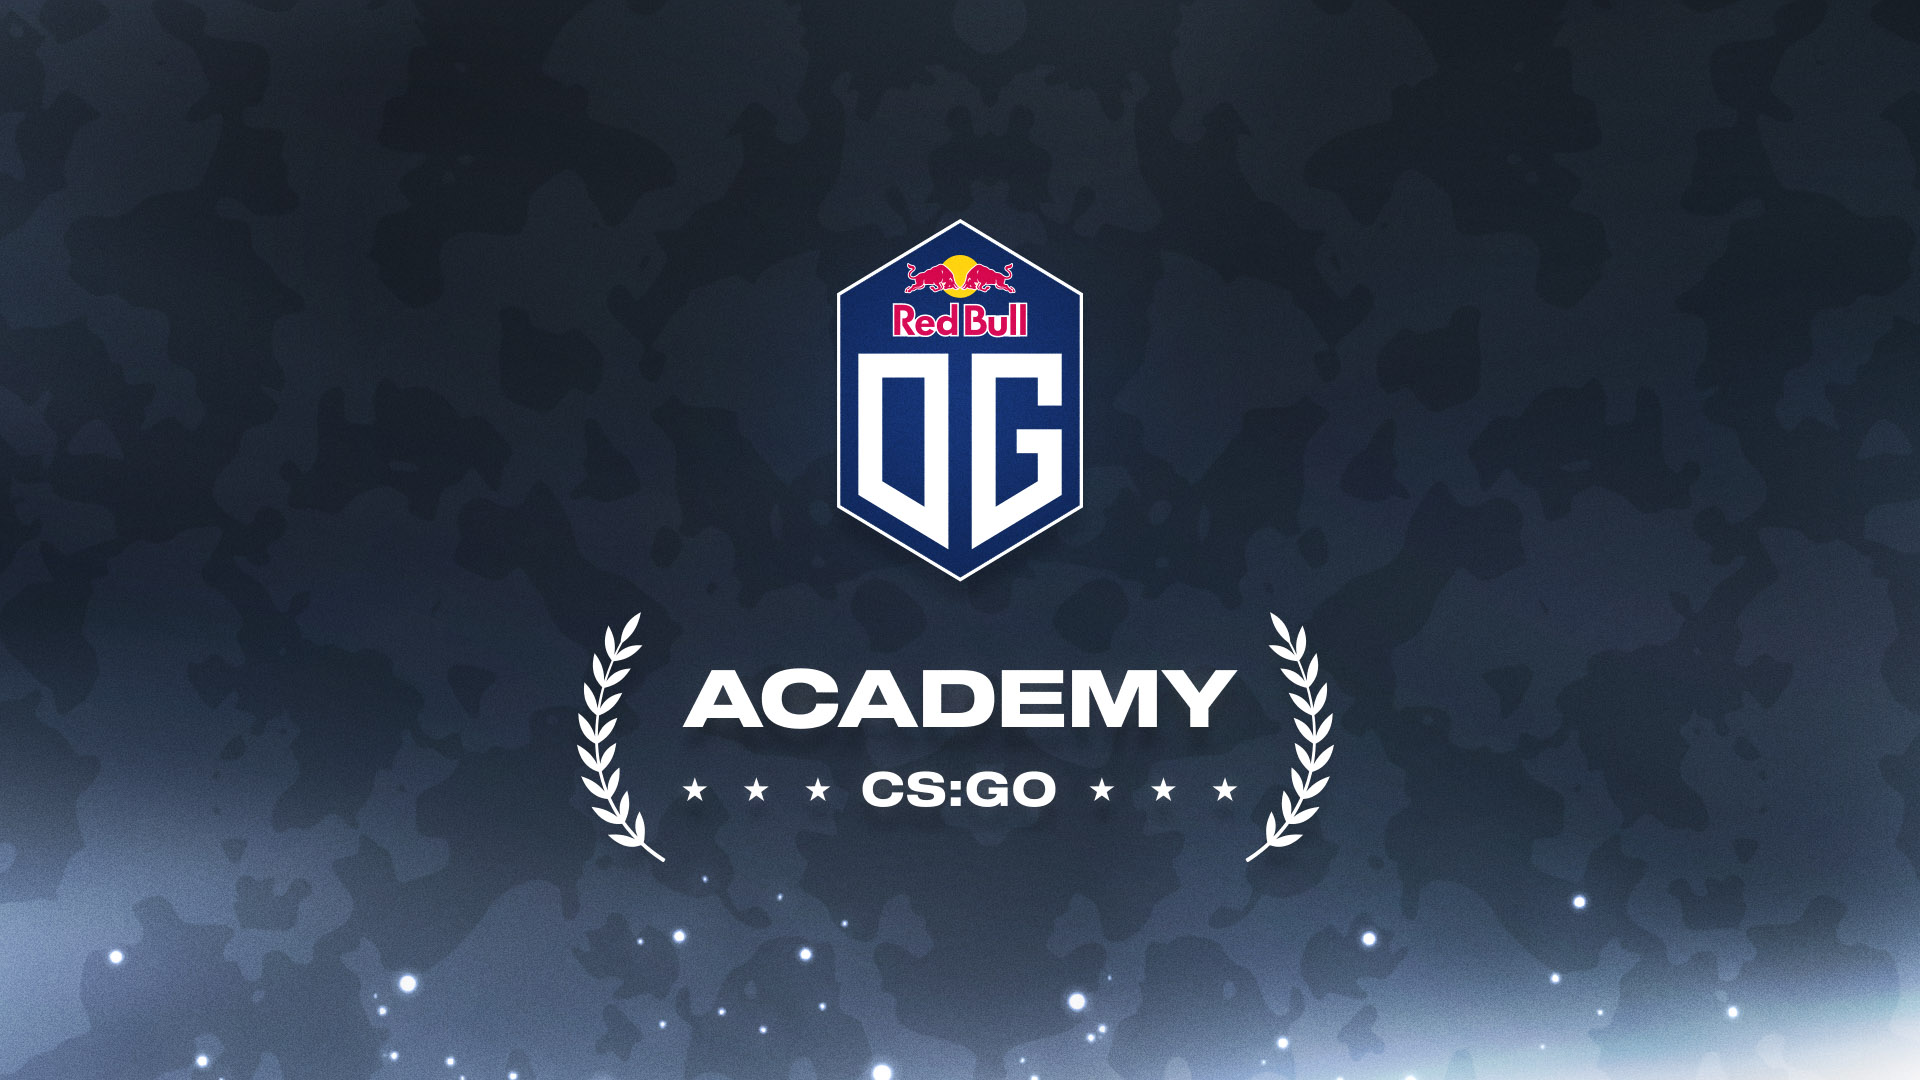 Partners With GGWP Academy For Tournament Series